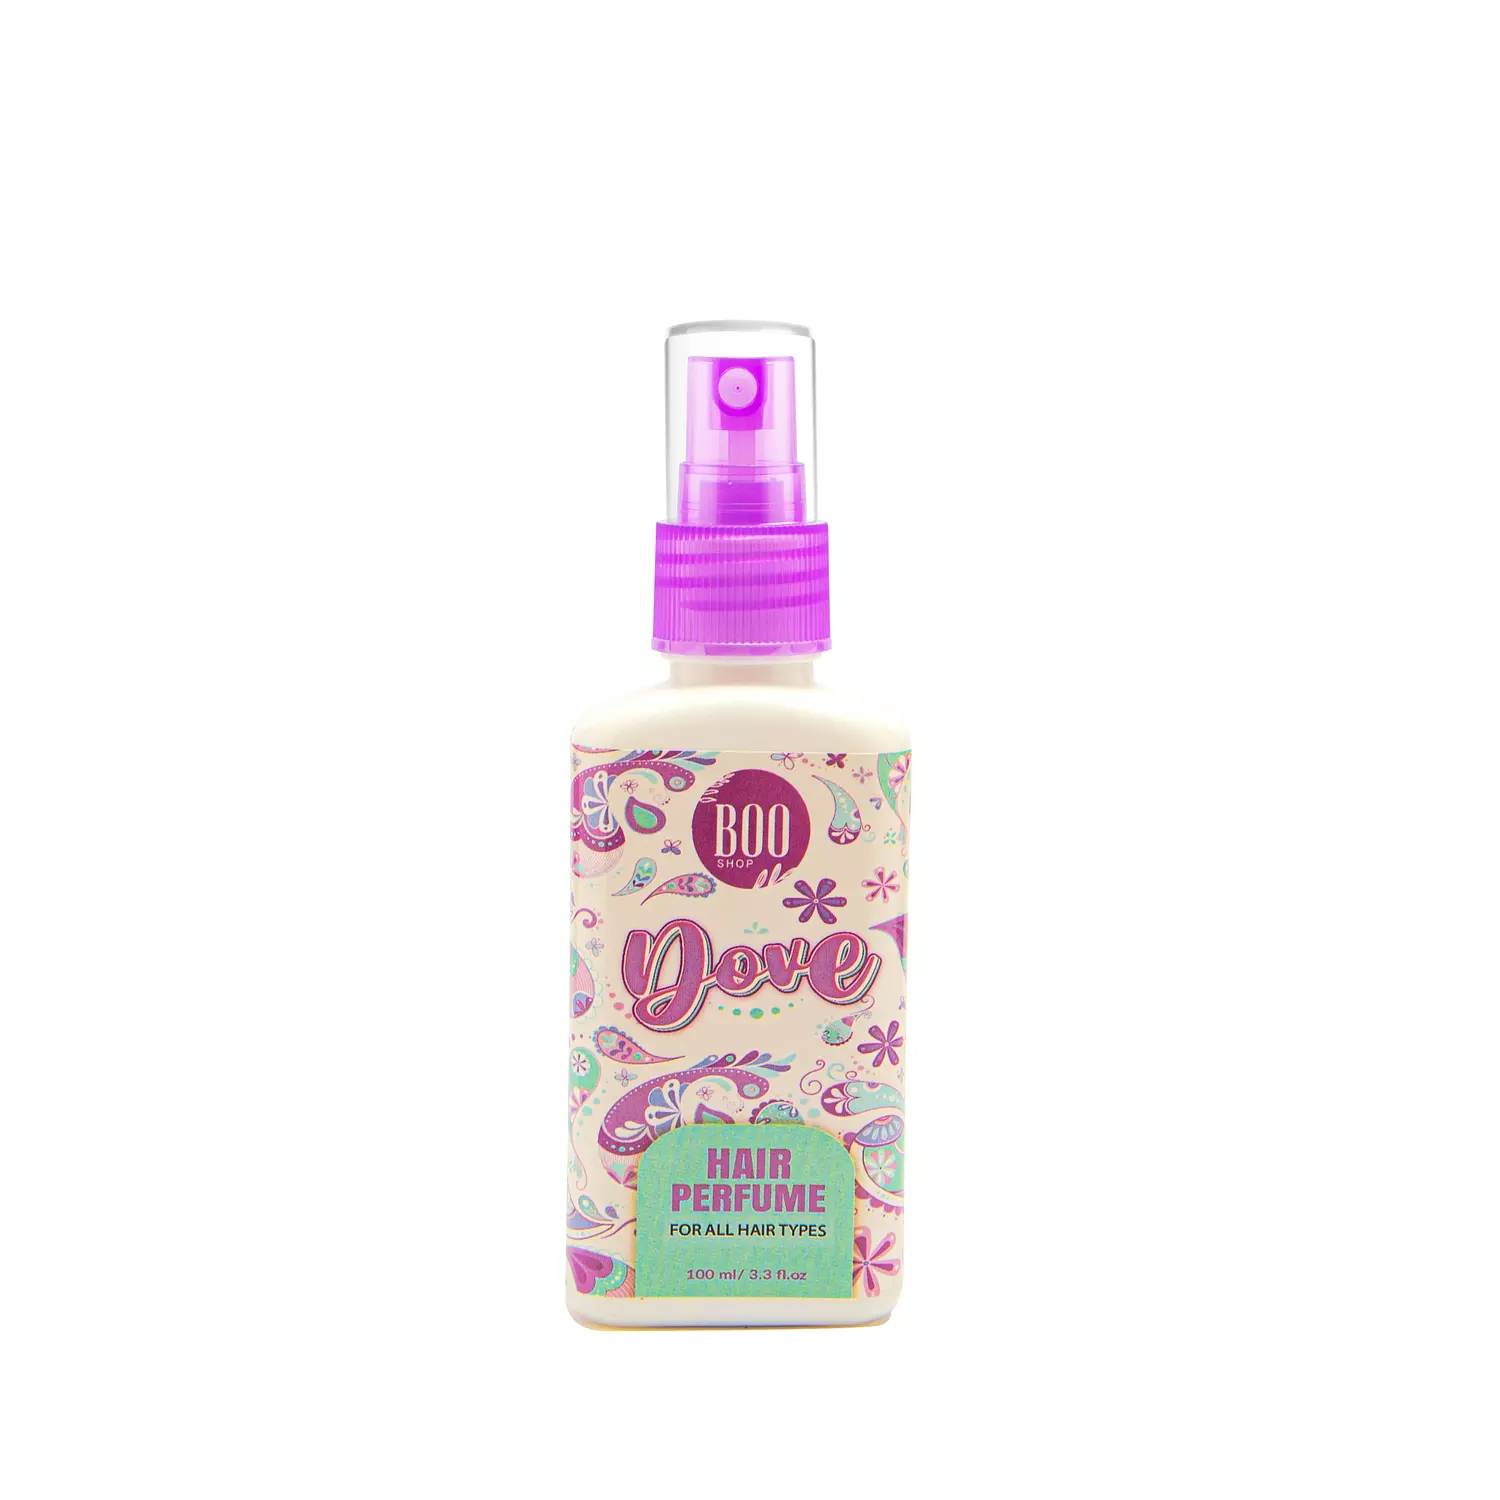 Hair perfume mist - Dove scent 100ml hover image